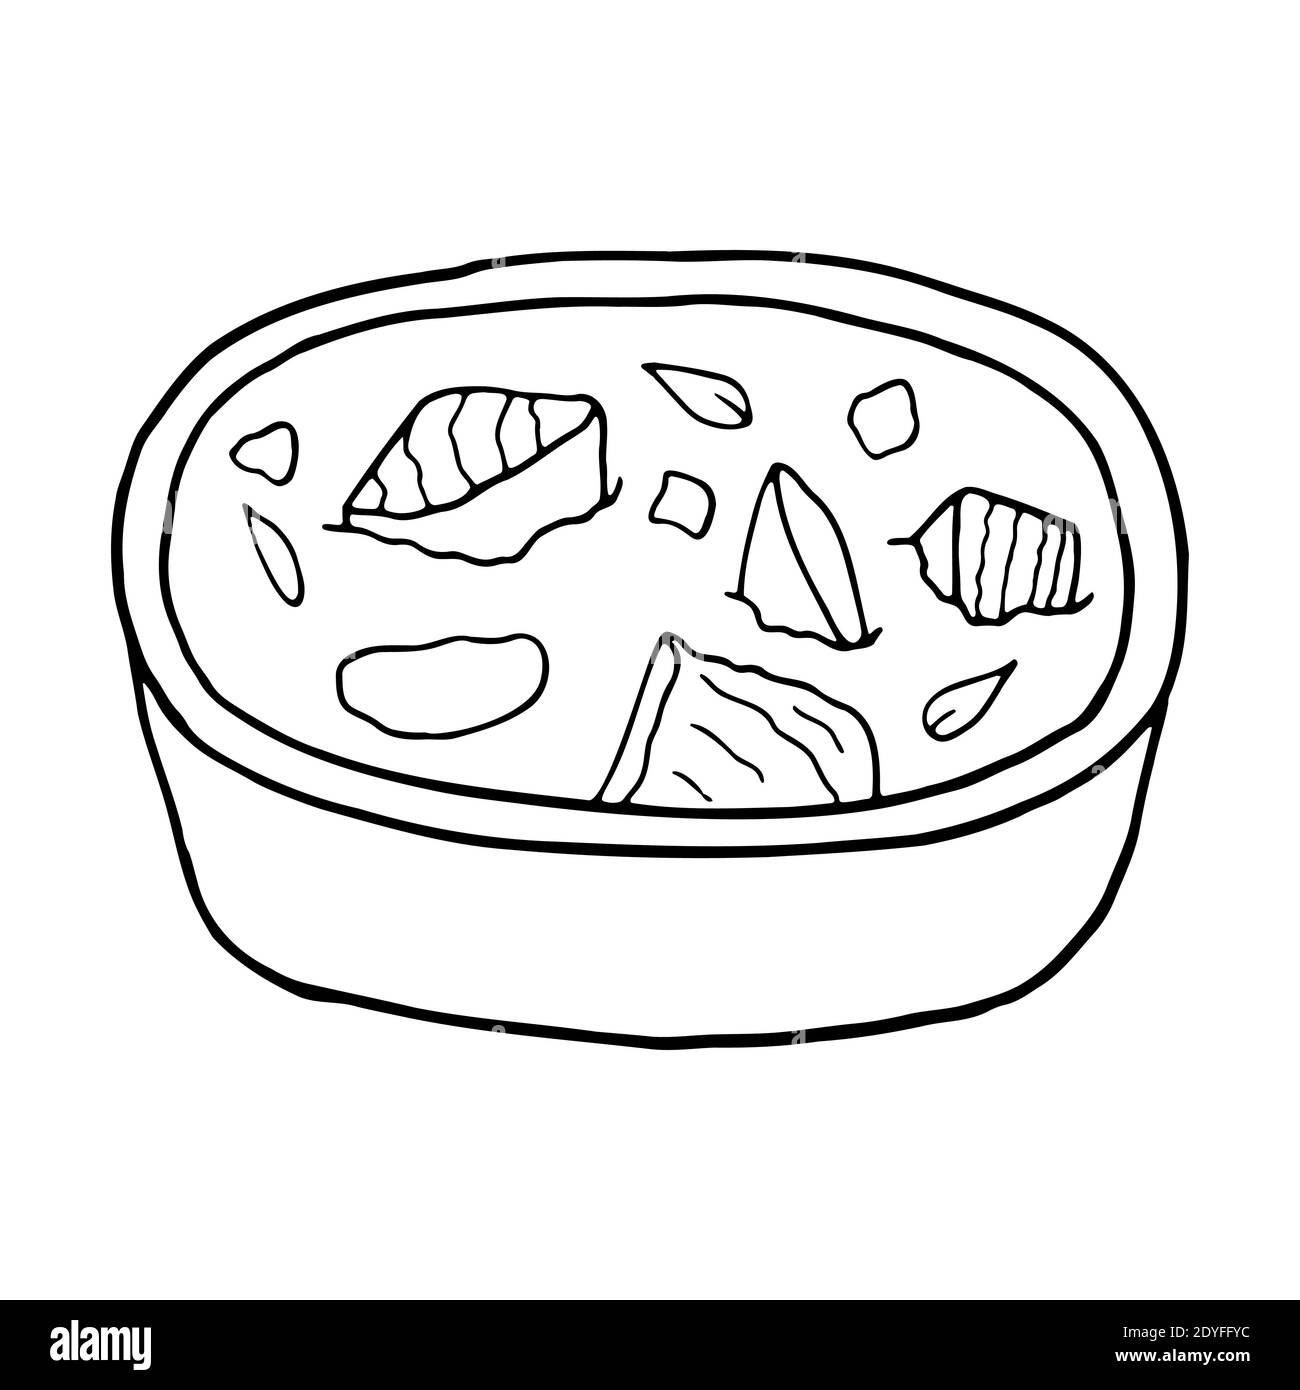 Vector hand drawn doodle curry. Indian cuisine dish. Design sketch element for menu cafe, restaurant, label and packaging. Illustration on a white bac Stock Vector